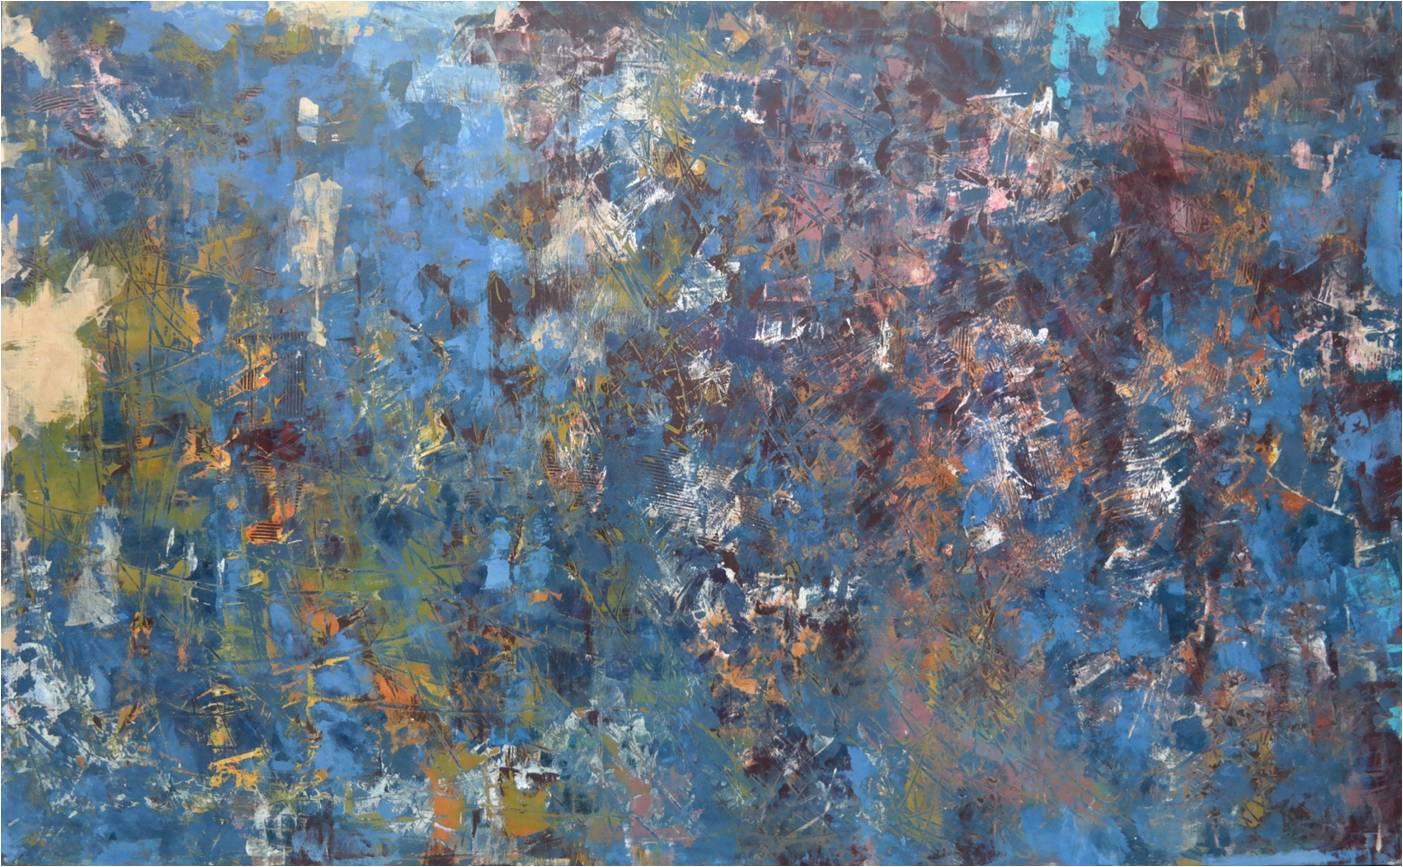 GIORGI VEPKHVADZE Abstract Painting - "Composition N 29". Oil on canvas. 28 X 48 inch.